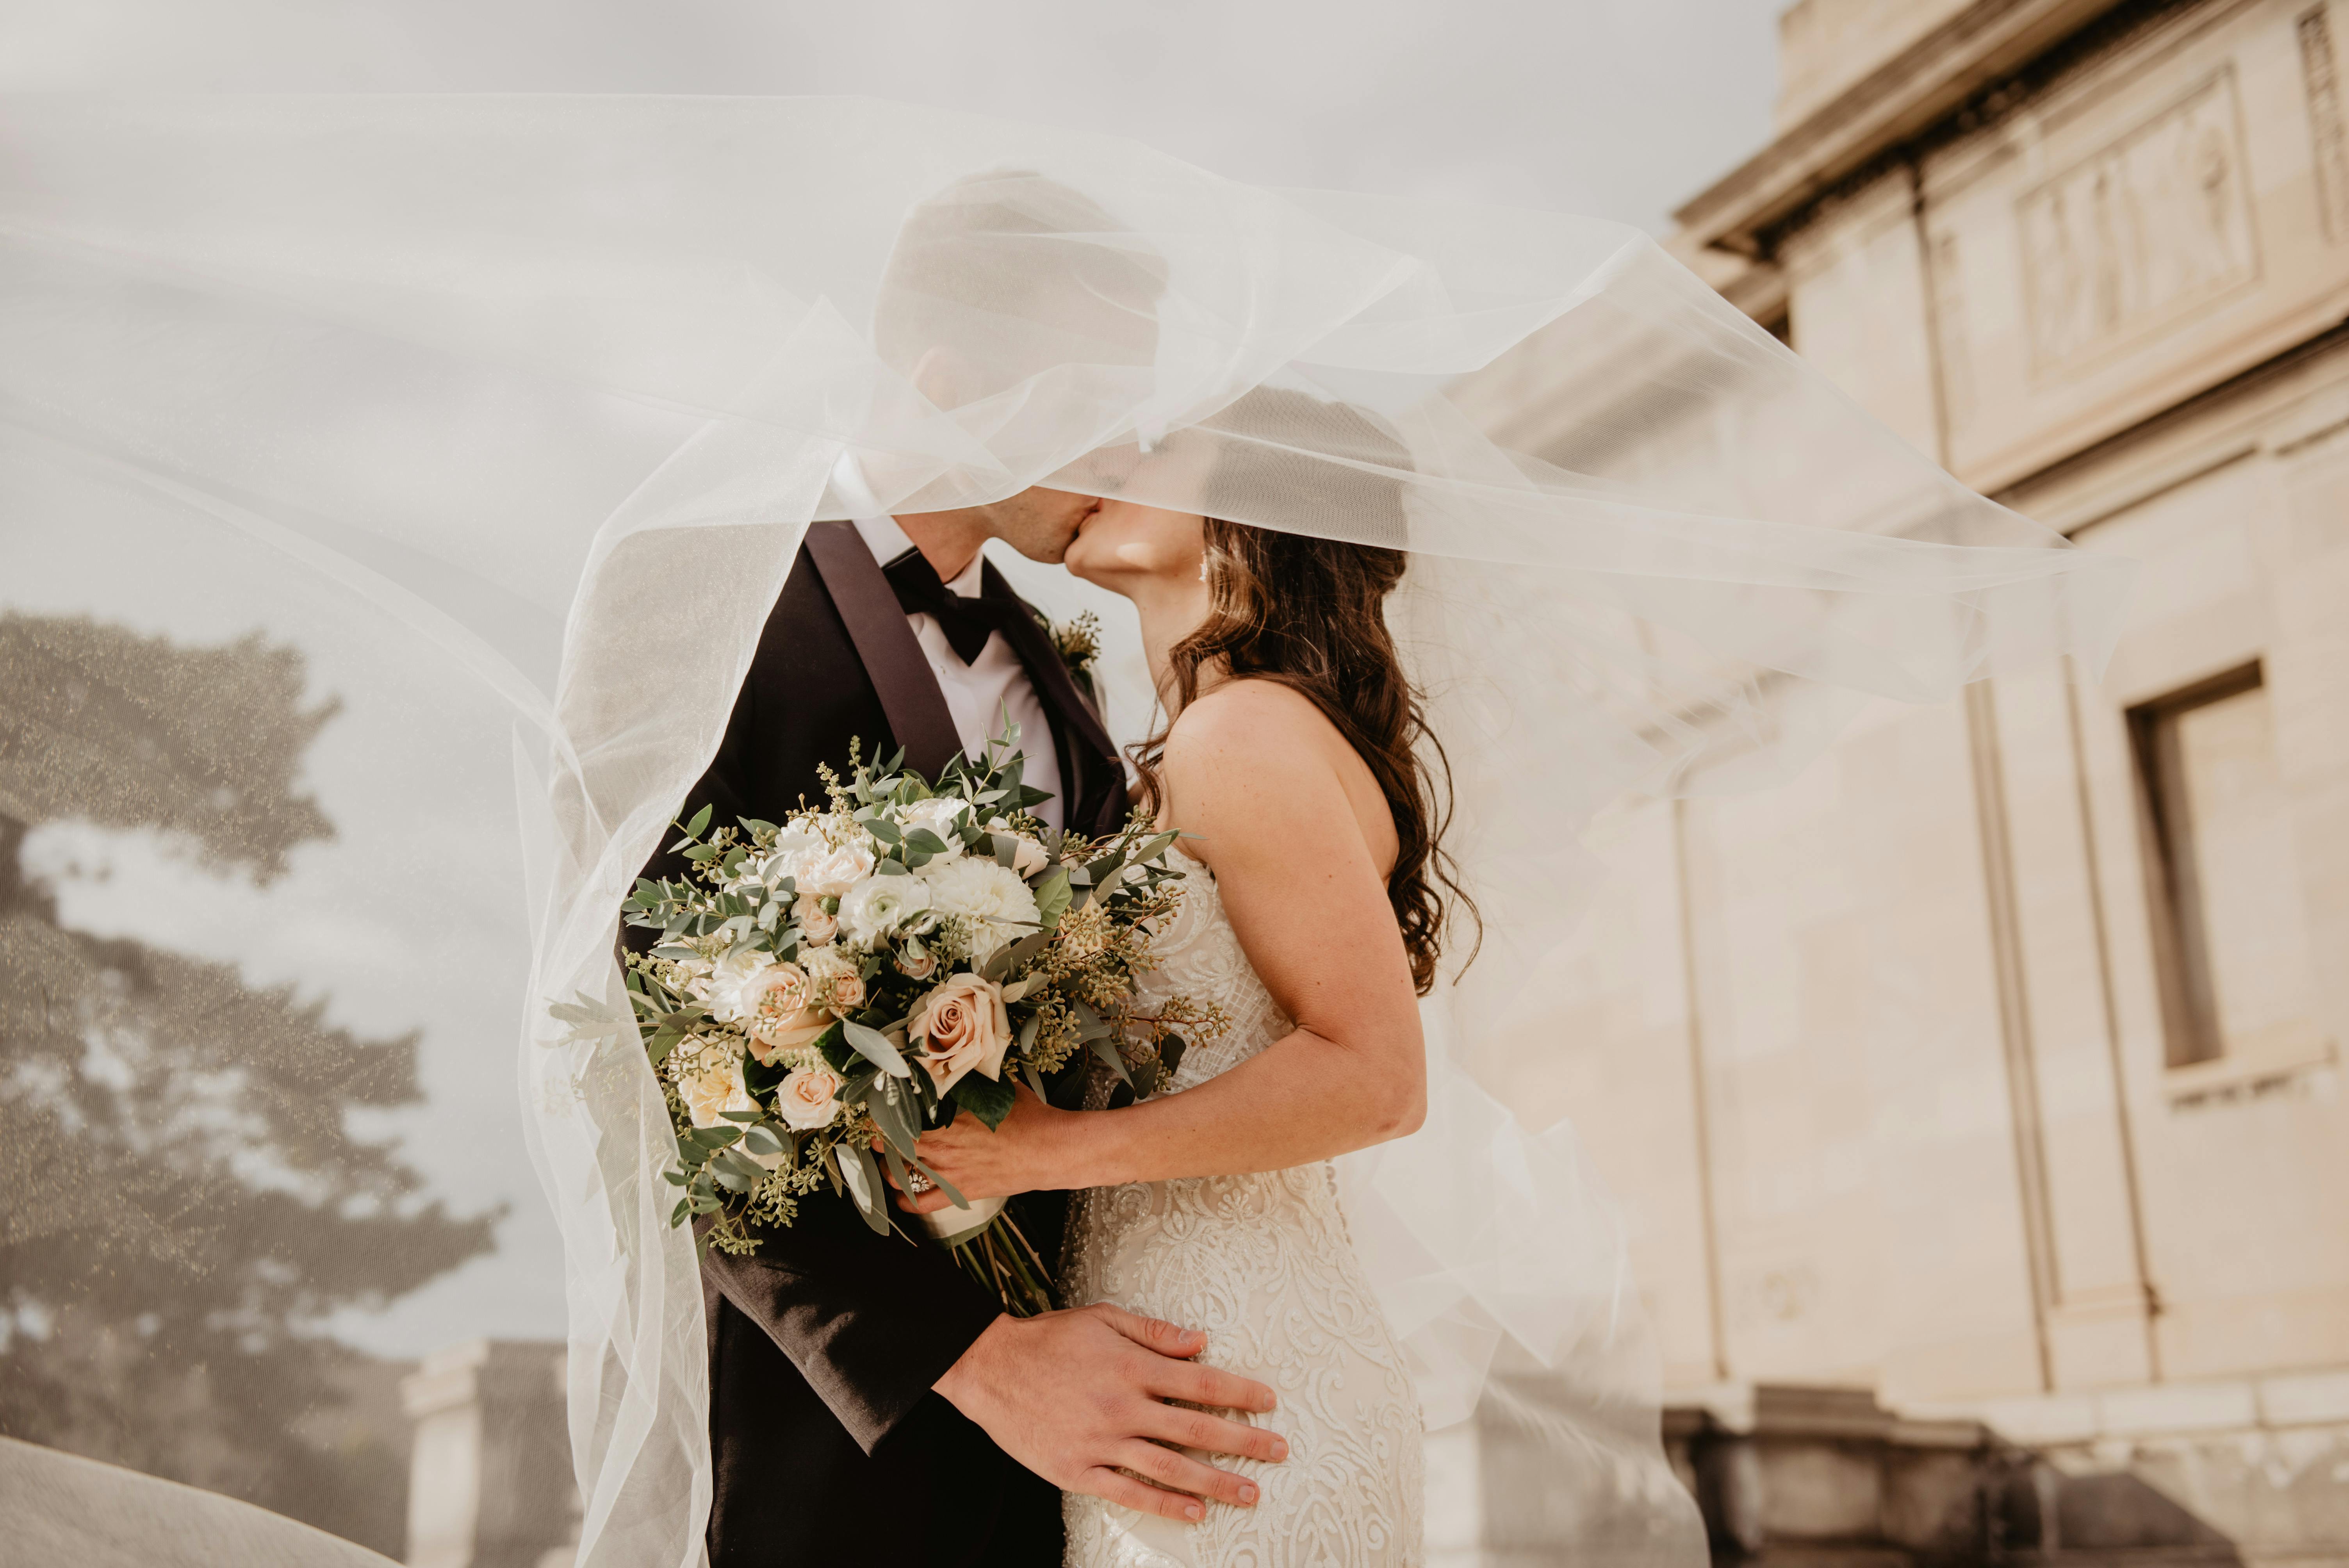 Man and woman kissing after wedding ceremony. | Photo: Pexels